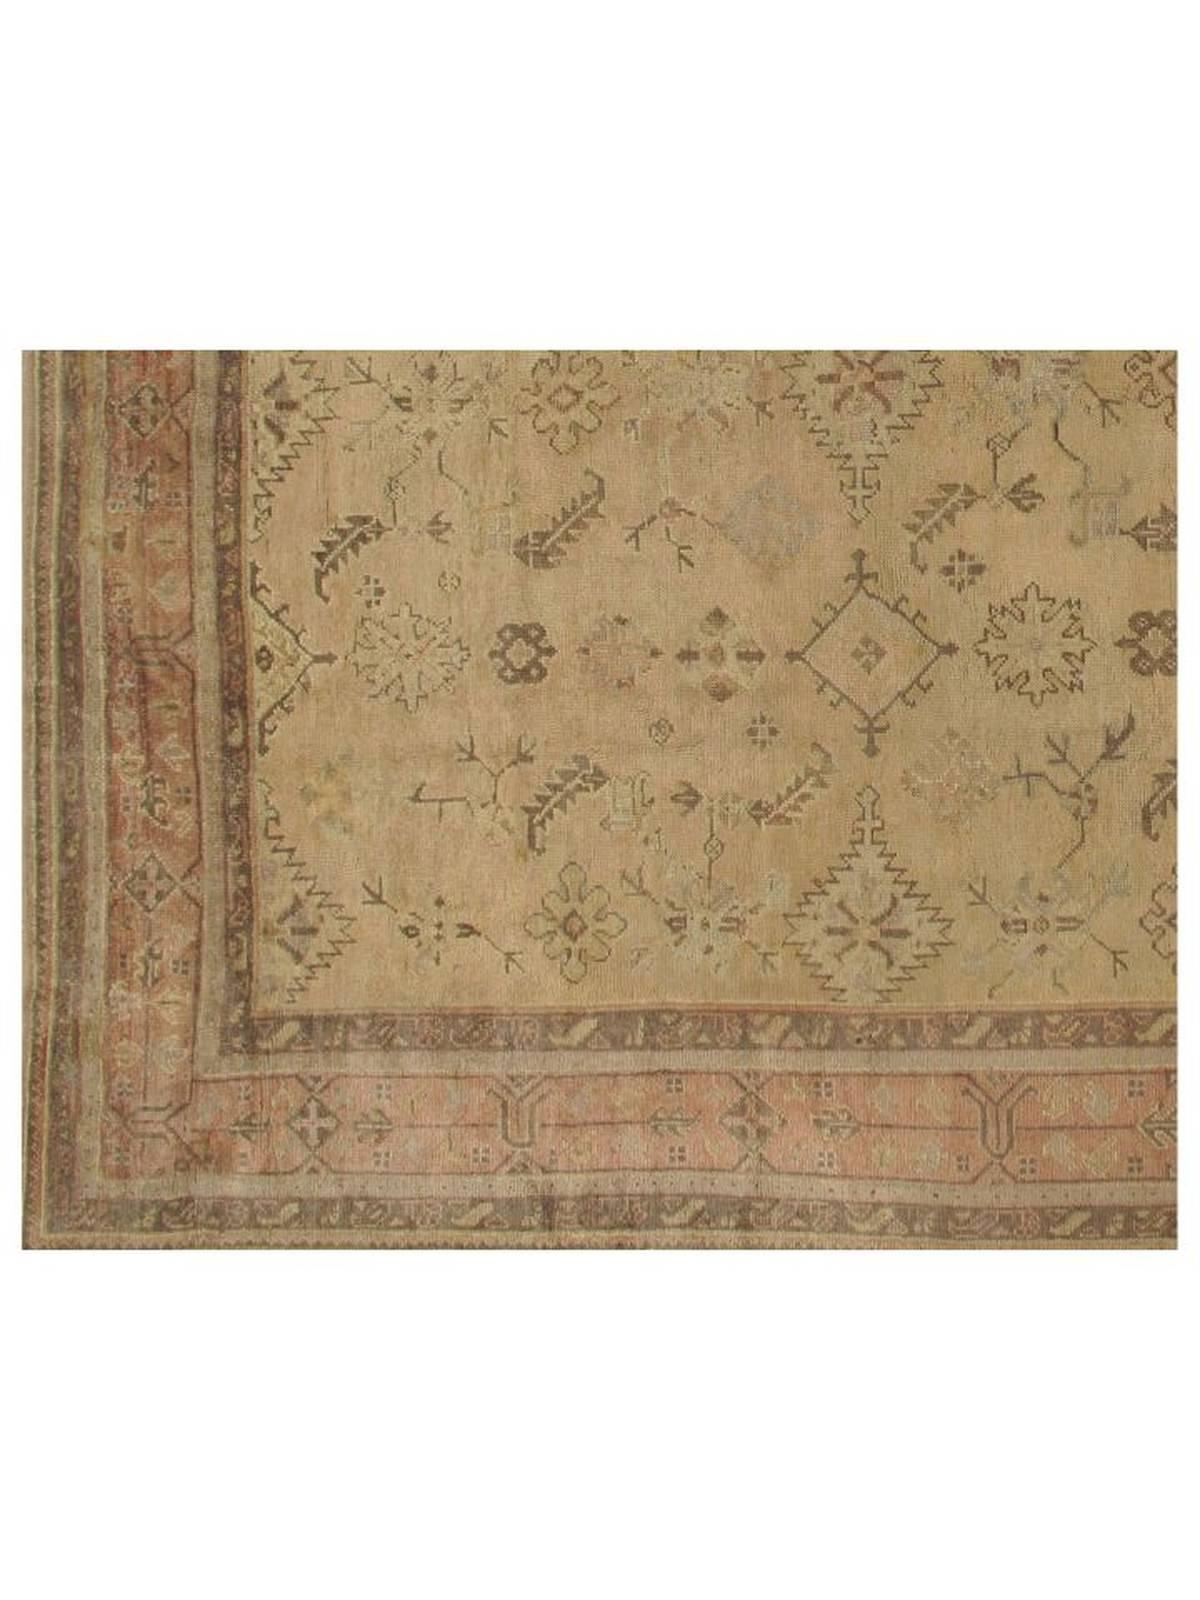 Hand-knotted wool Turkish Oushak rug, showcasing traditional motifs surrounded by detailed borders in a harmonious blend of warm hues. Rendered in soft gold, faded coral, taupe, grey and green. Very good condition with minor wear consistent with age